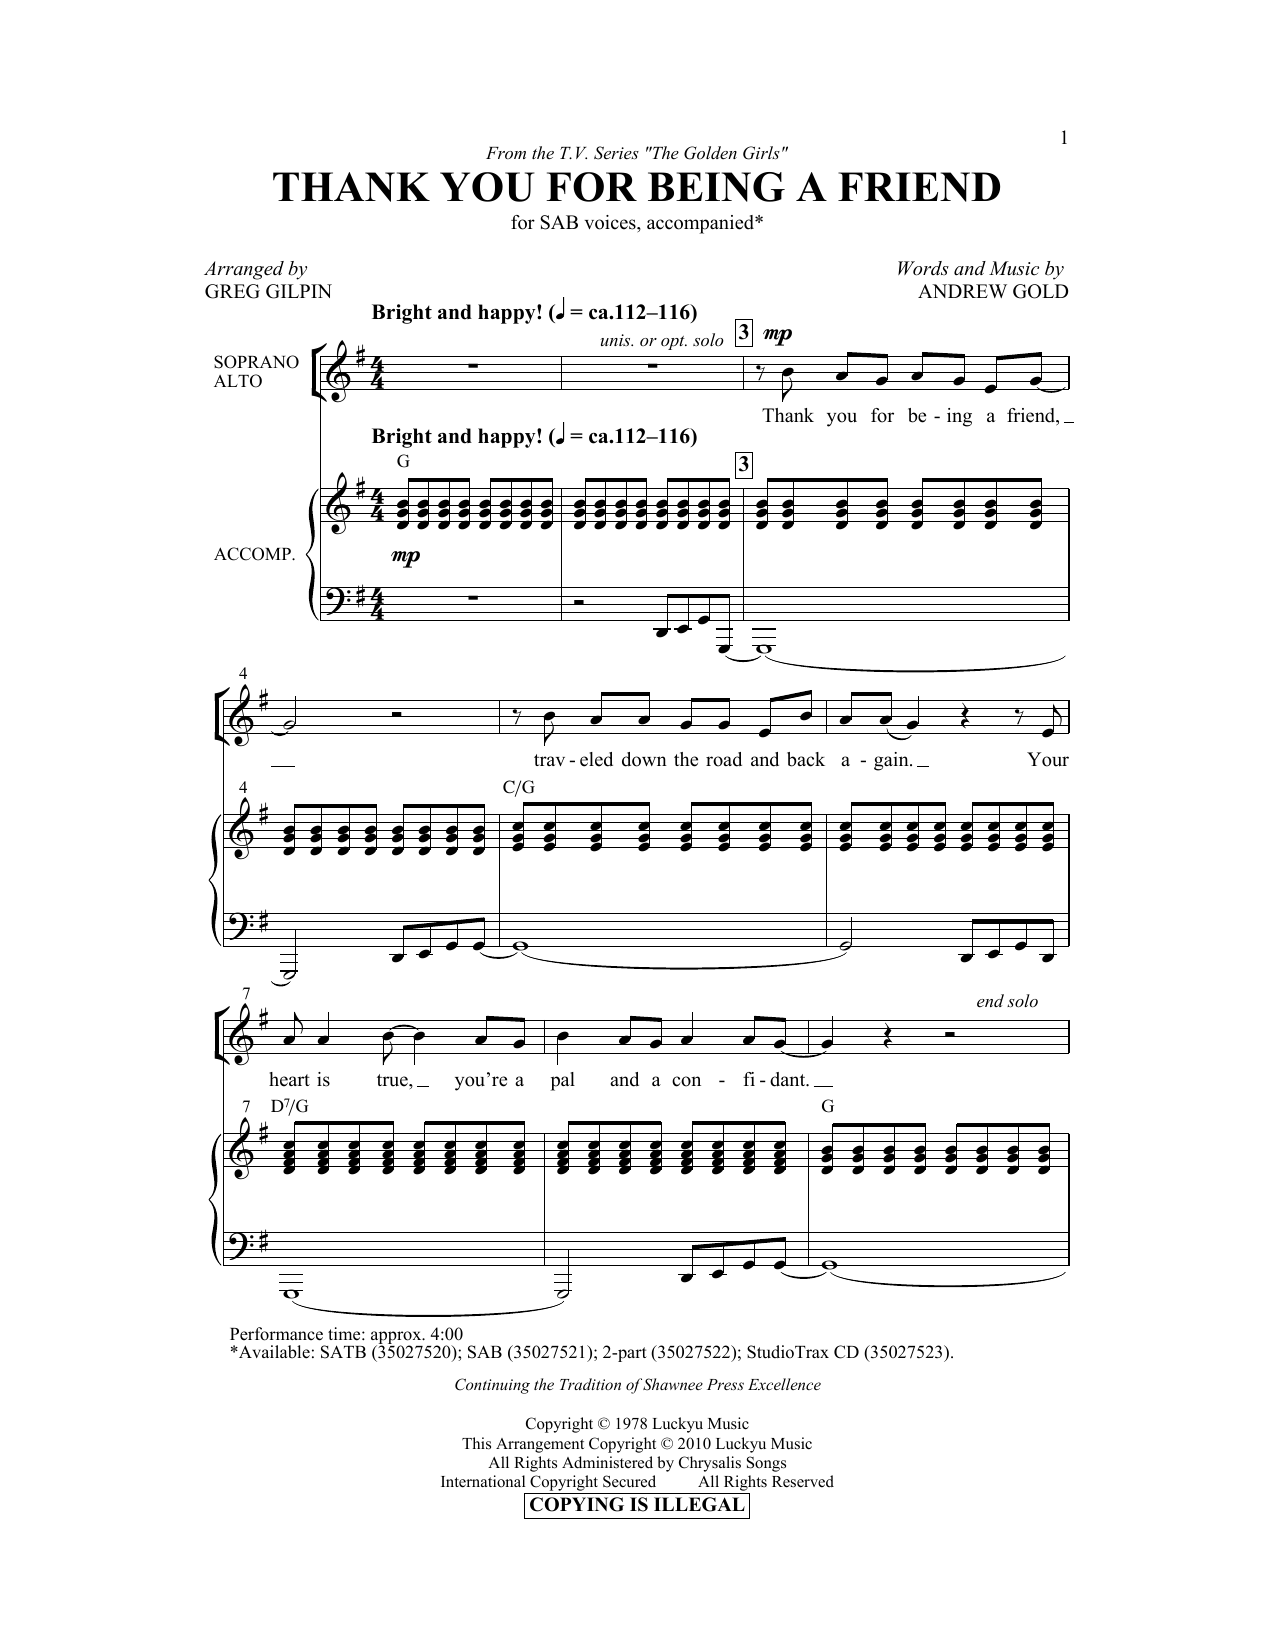 Download Andrew Gold Thank You For Being A Friend (Theme fro Sheet Music